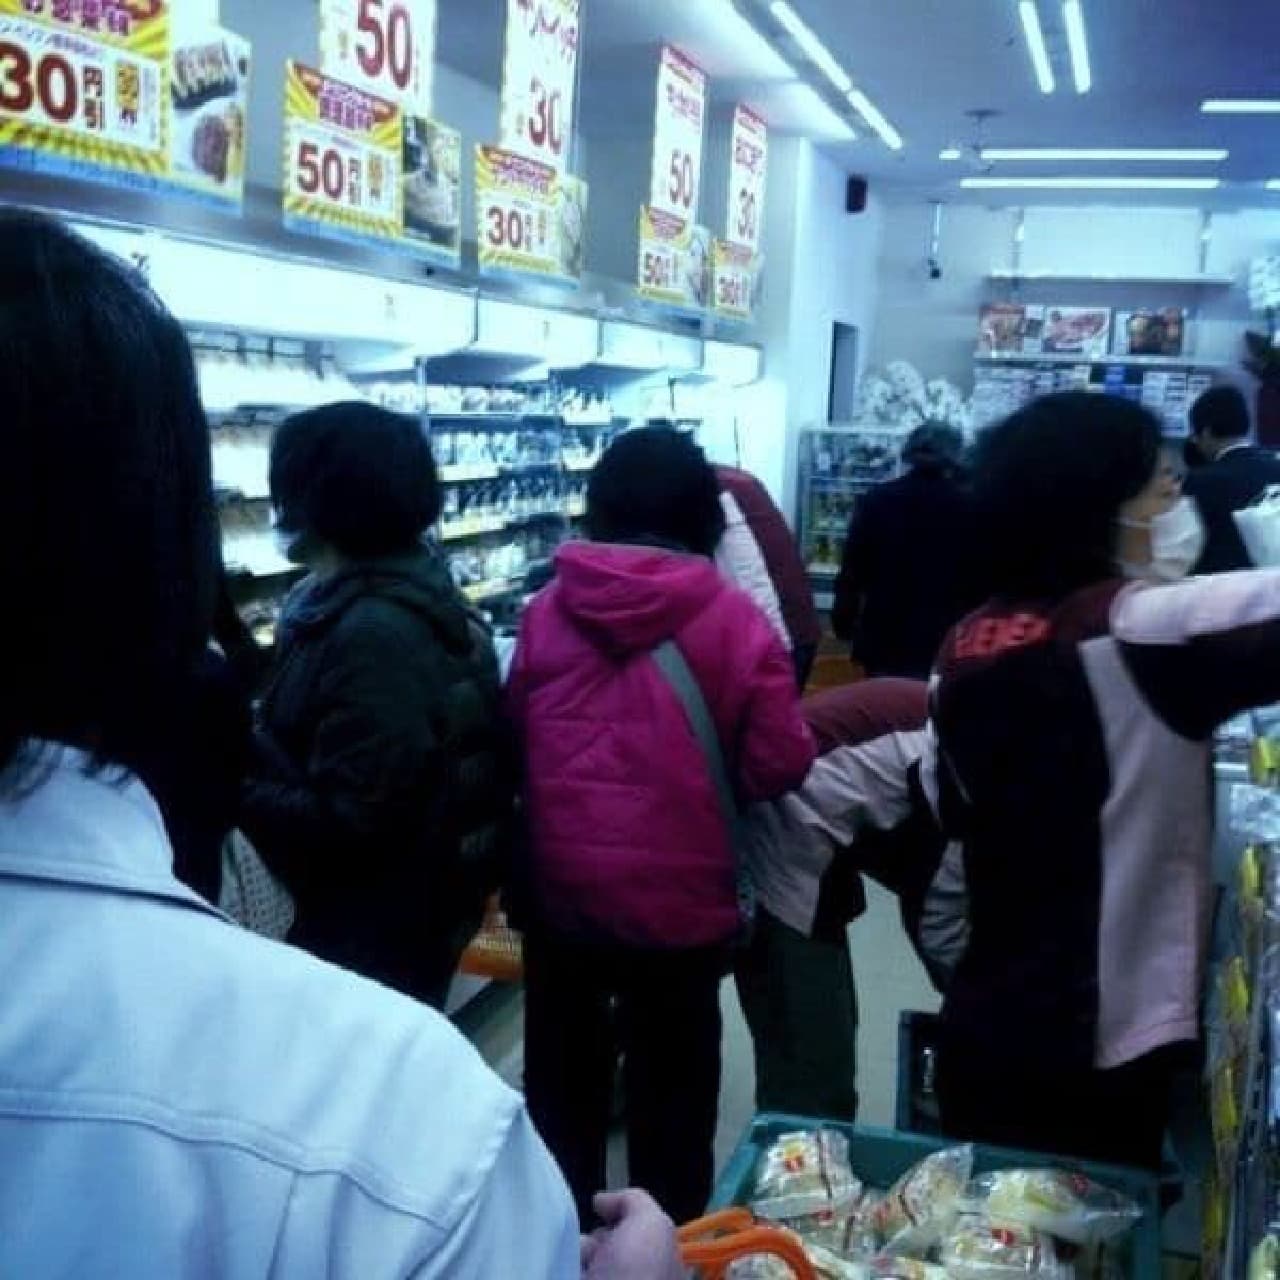 Inside the 7-ELEVEN store on the day of opening [Photo courtesy of @chickendarts]